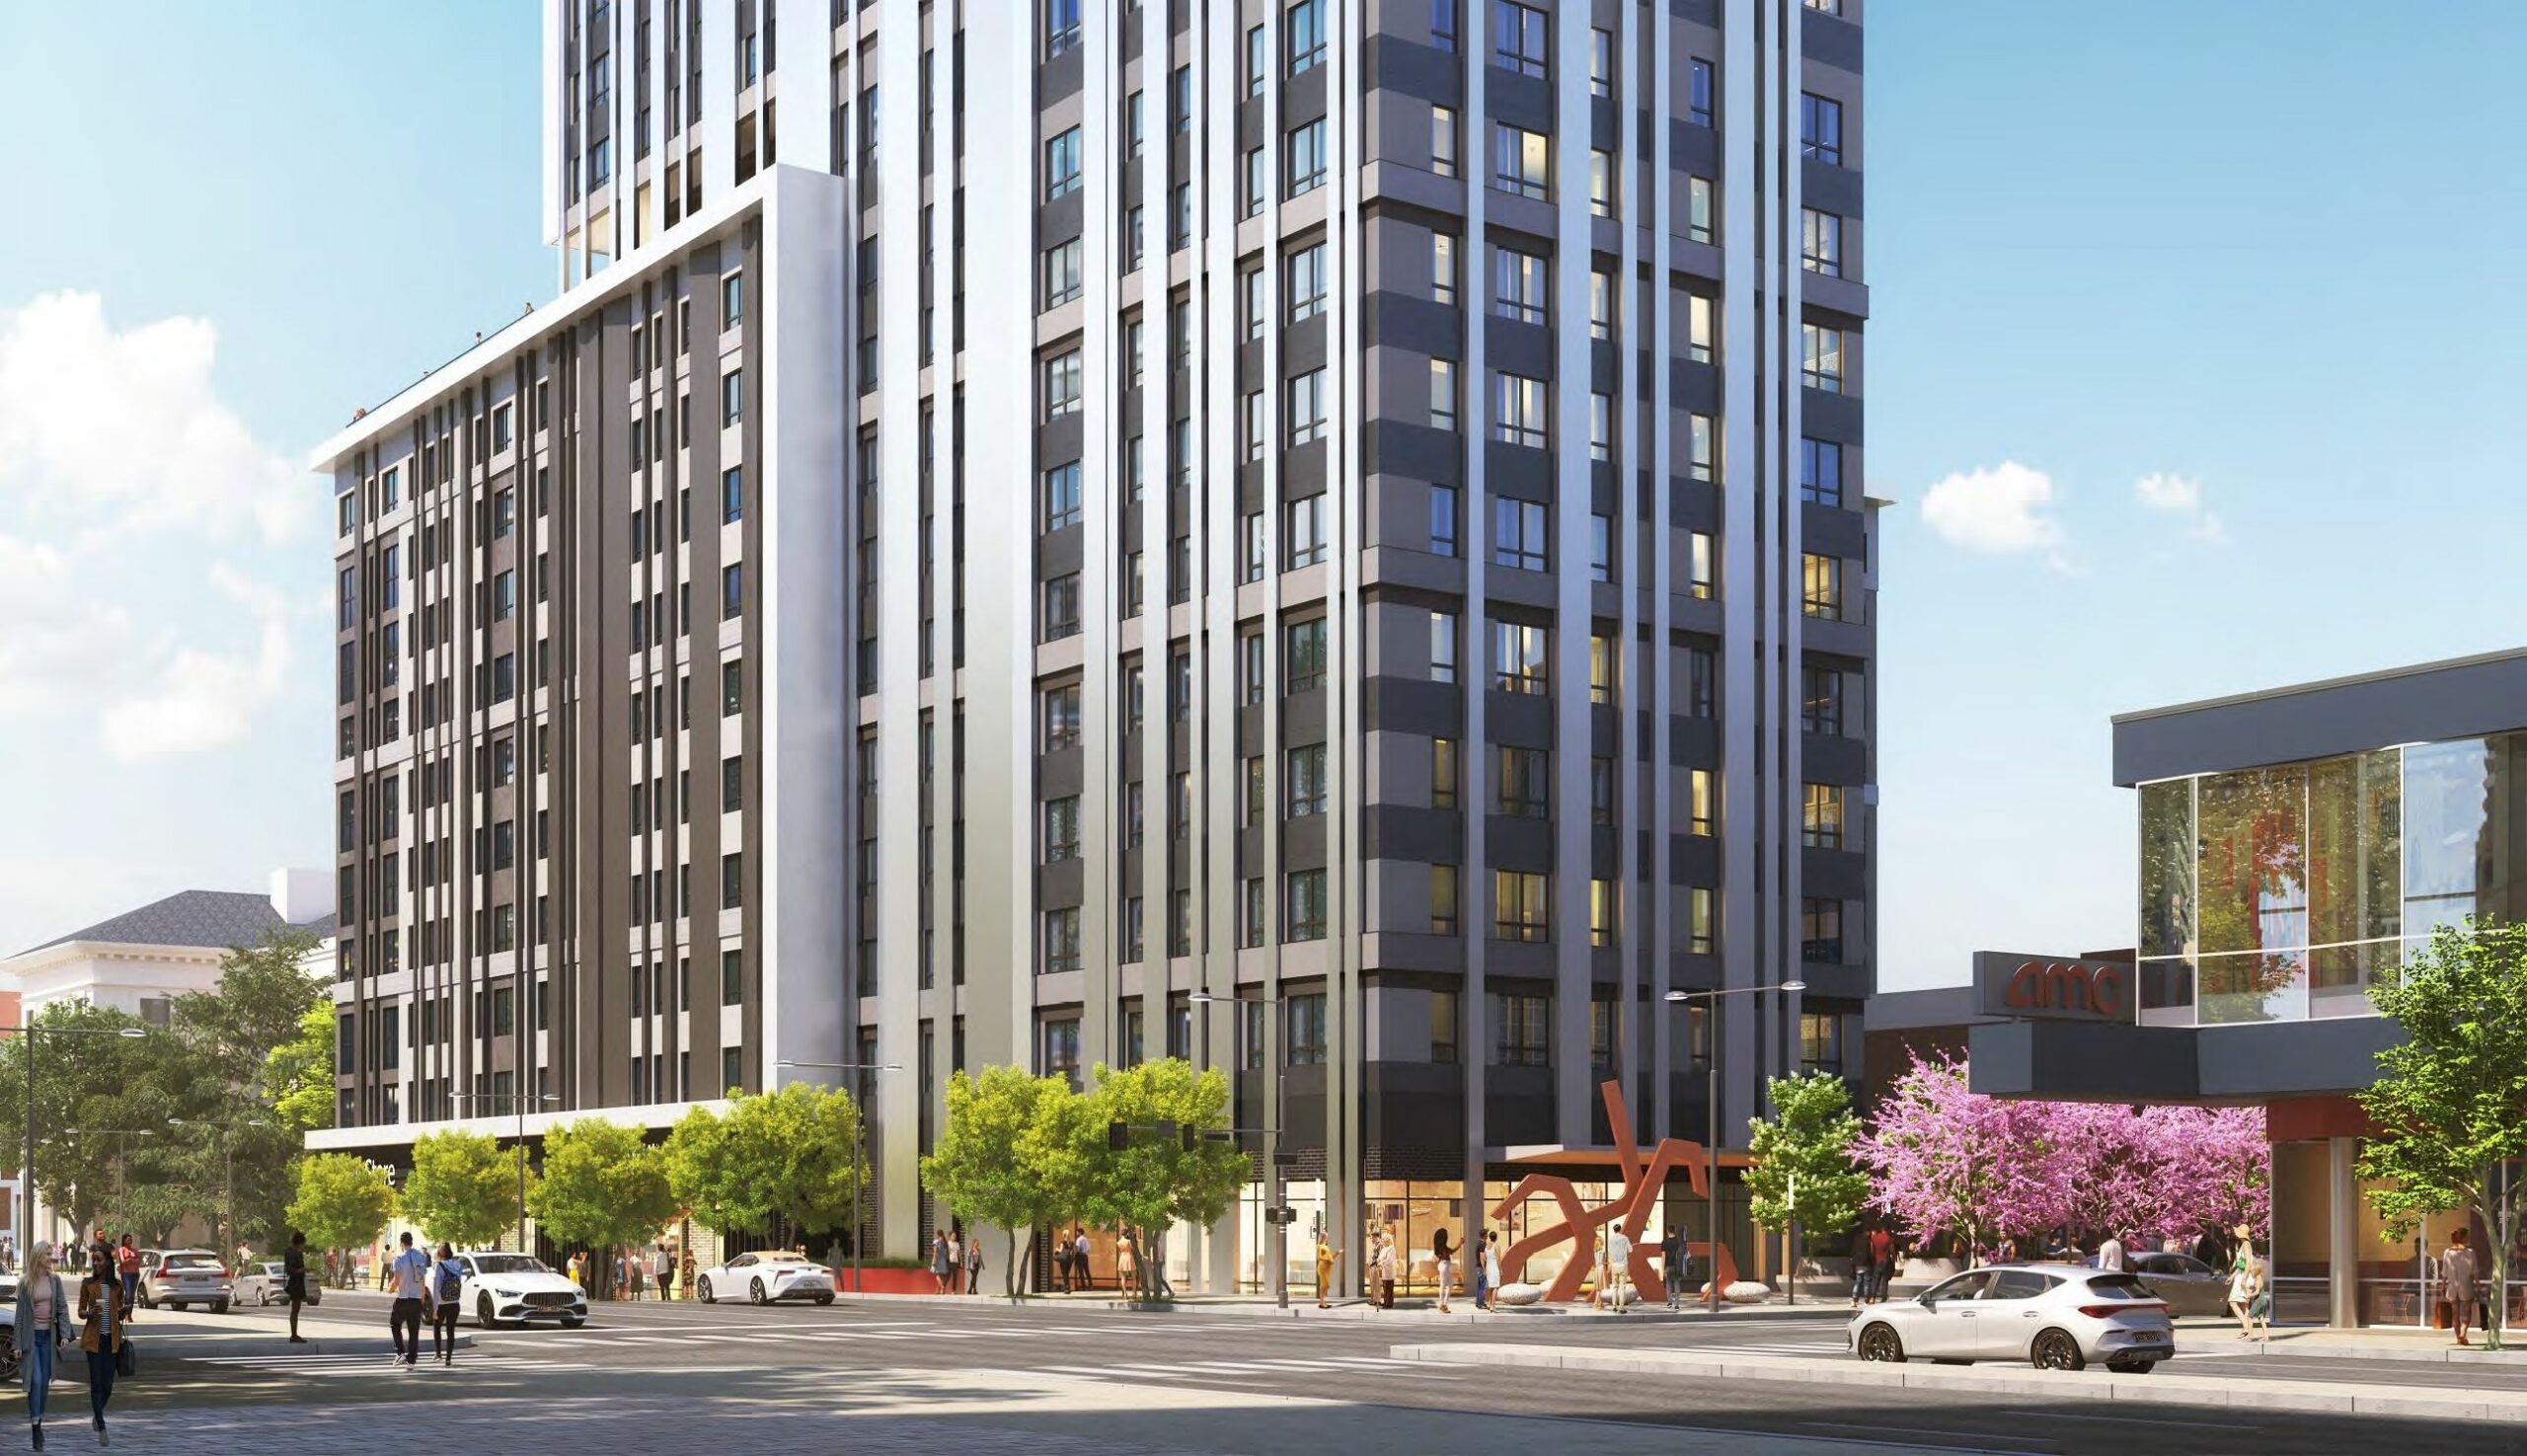 Legacy on Broad at 1518-28 North Broad Street. Building rendering. Credit: CUBE 3 Studio LLC via the Civic Design Review